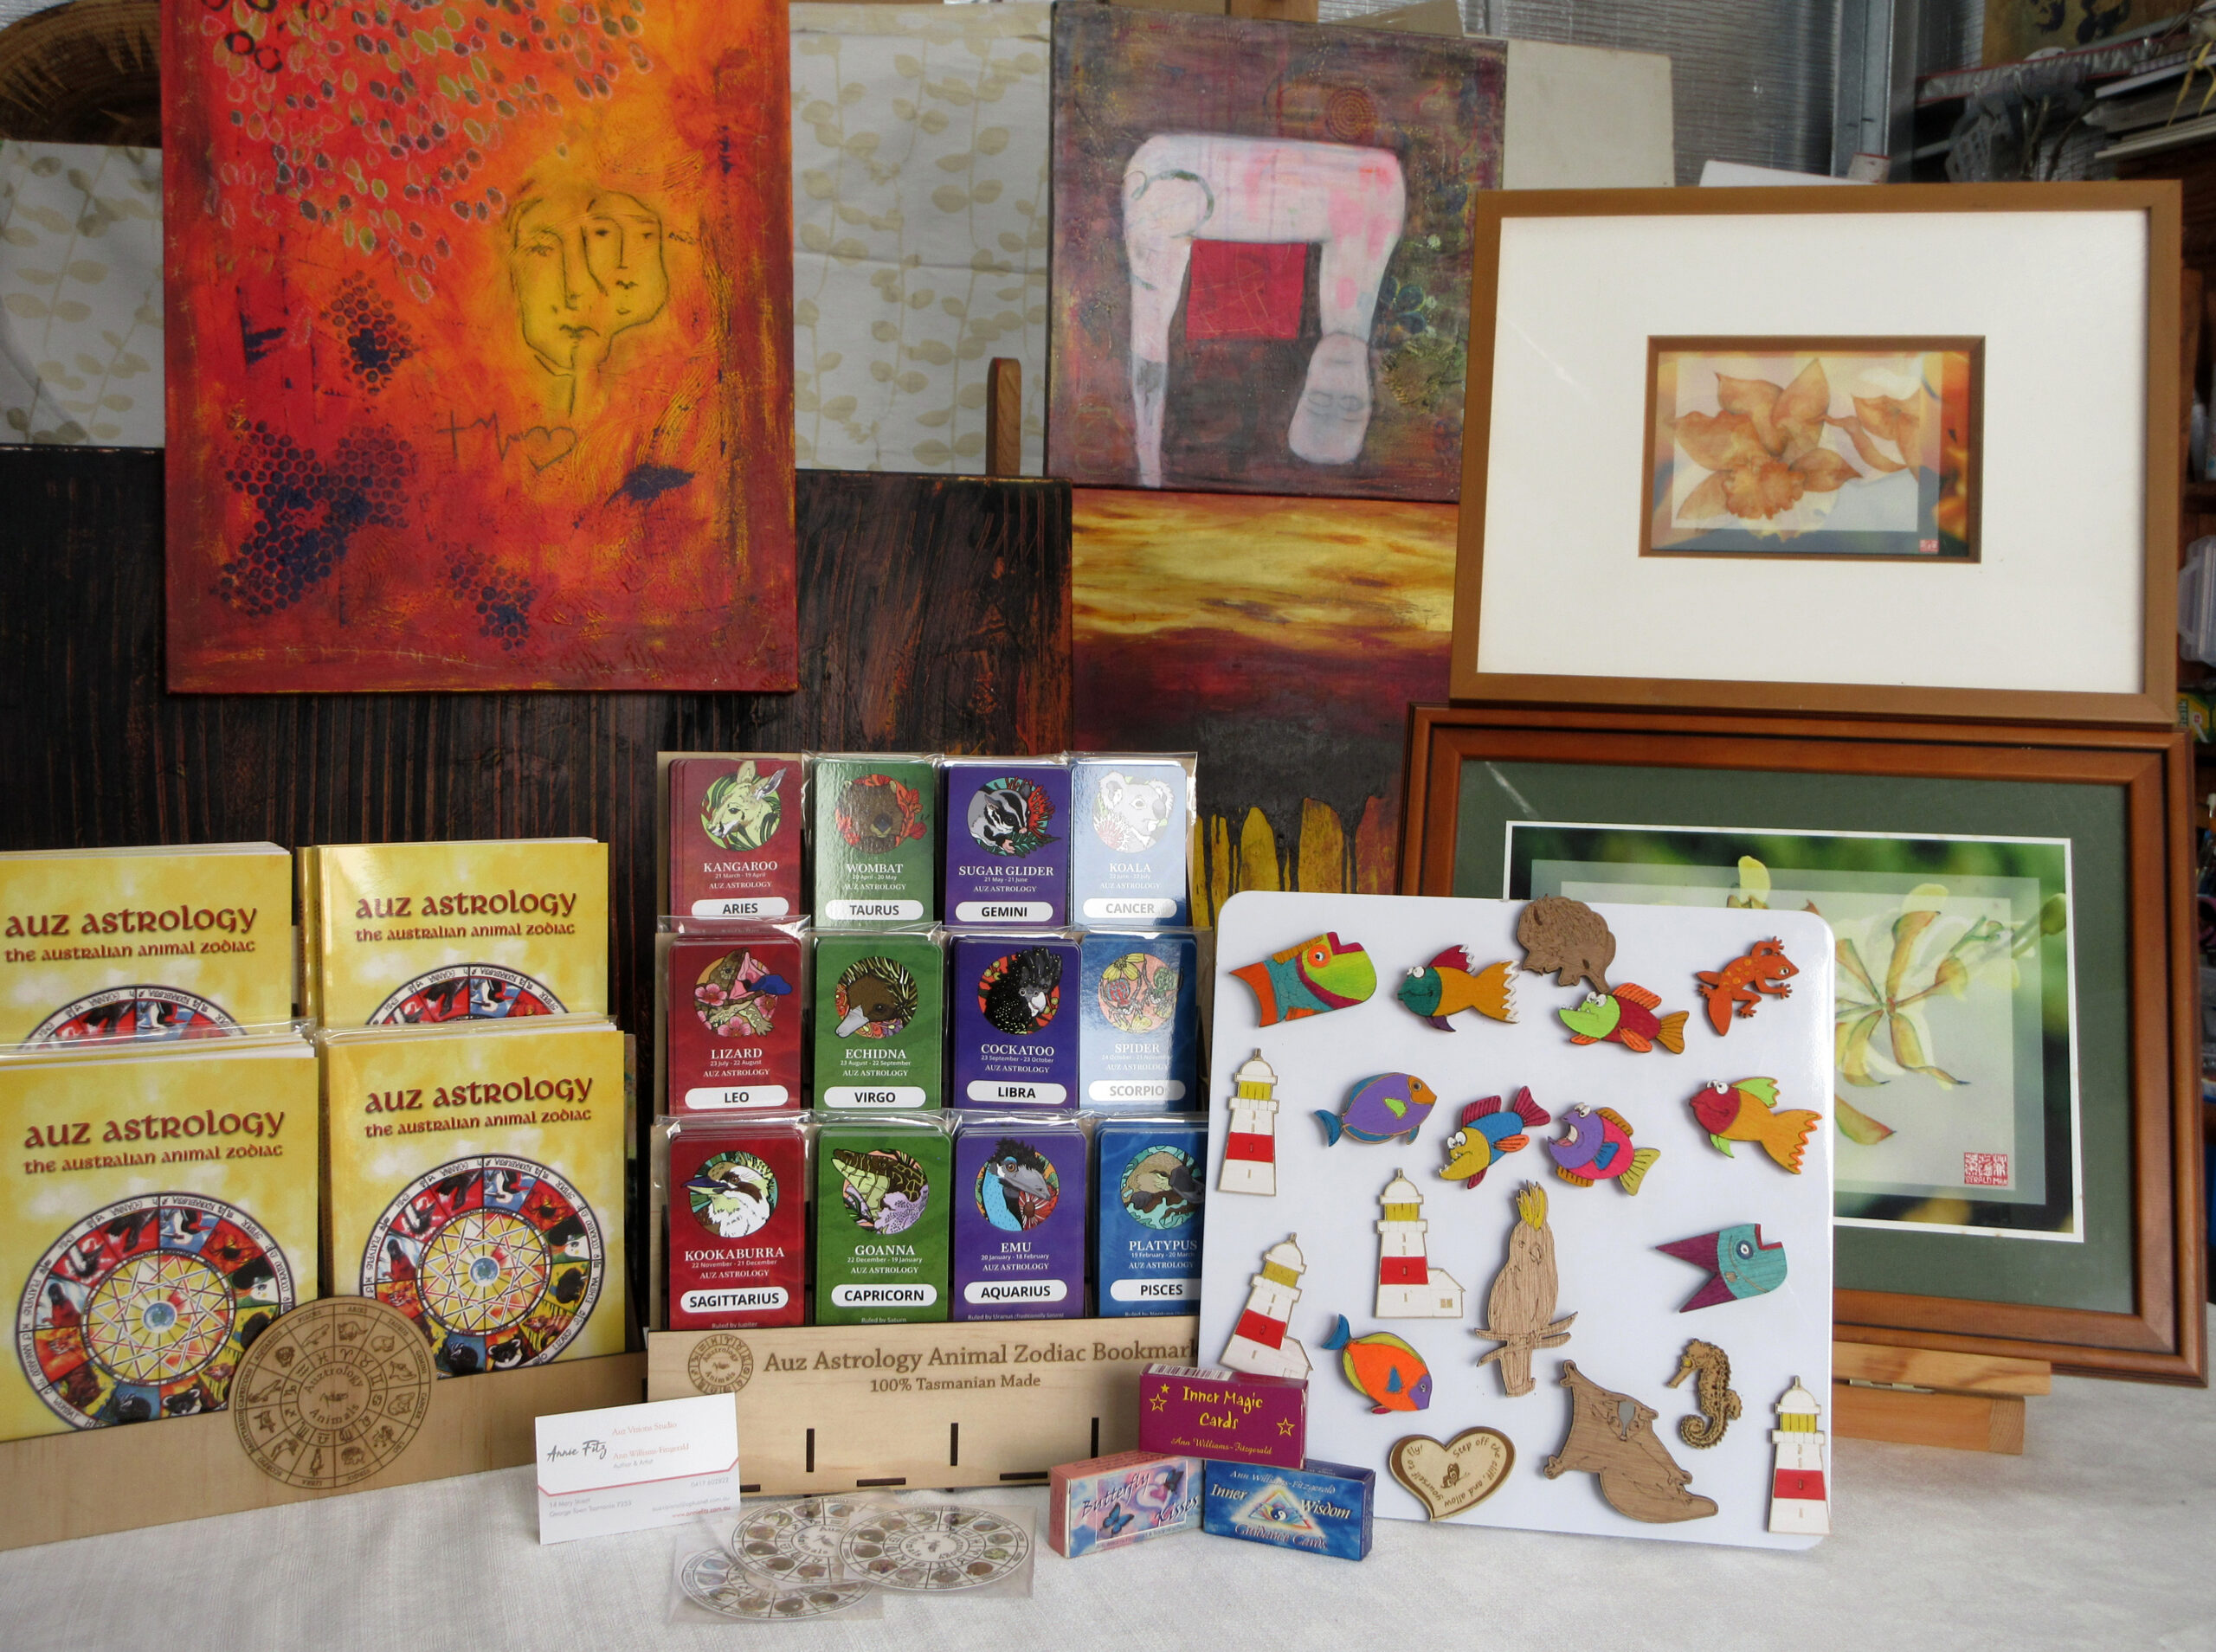 Designs and cards by Ann Williams-Fitzgerald in her Artist Profile with Art Trails Tasmania